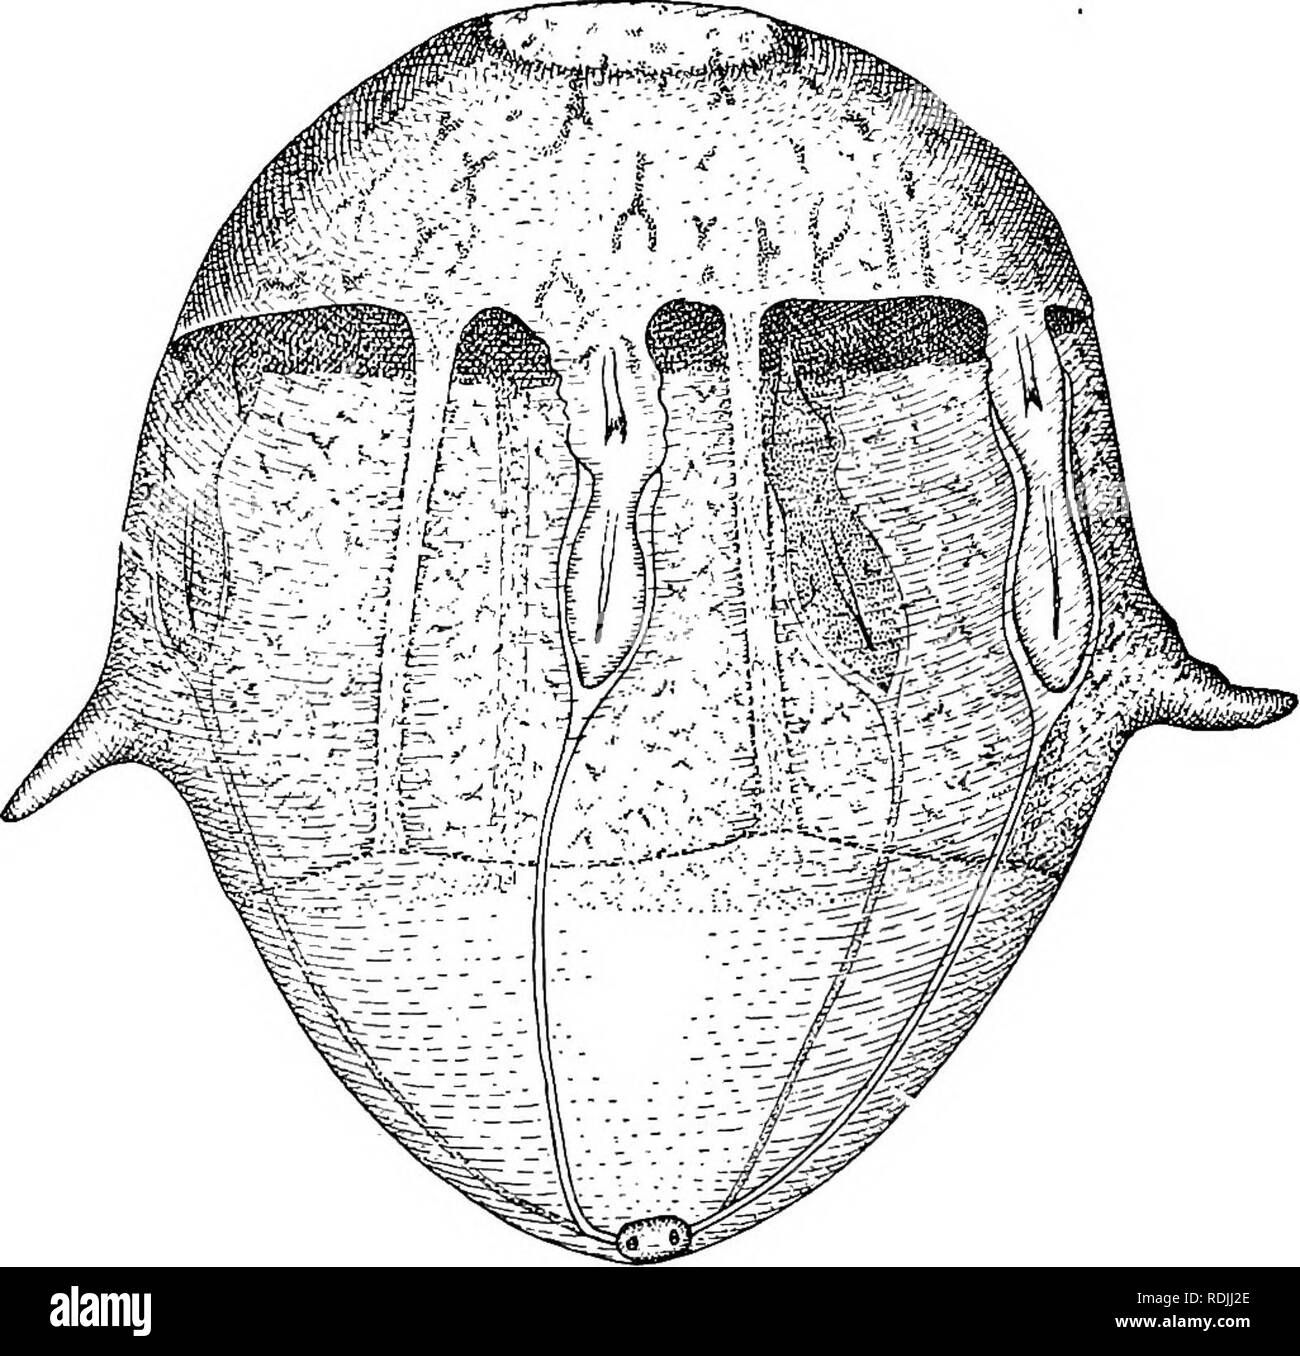 . The biology of twins (mammals) . Twins. 54 THE BIOLOGY OF TWINS top and the common amnion at the bottom of the figure. This arrangement, doubtless, looks upside down to one famihar with previous accounts of the embryology of. Fig. 17.—^Armadillo egg with quadruplet embryos attached to primitive placenta, which is a bowl-shaped area at top of figure. Note the connecting canals running downward to the original common point of origin, which is now occupied by the small common amnion. (See stage IX.) (Redrawn from Newman and Patterson.) Dasypus, but the reversal of axis is an important feature o Stock Photo